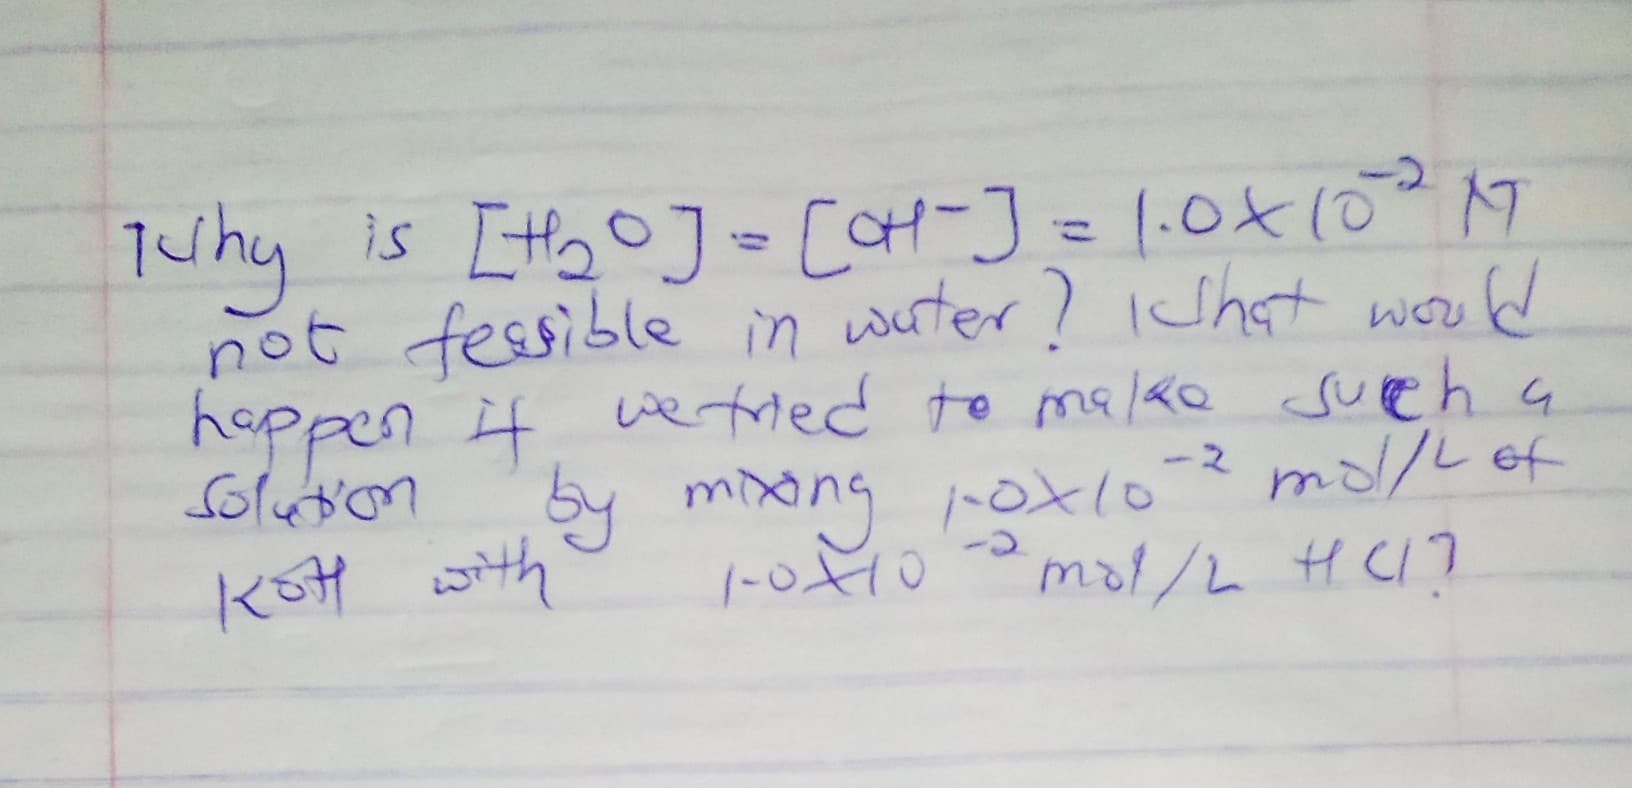 Tuhy is [tooJ-CCH-J=1.0xl0 17
not fessible in wirter? IShat word
hoppen it wetred to malke sueh a
Solution
WOU
by mong oxlo
ー2 mol/Lef
KoH with
mol/2 HCI?
